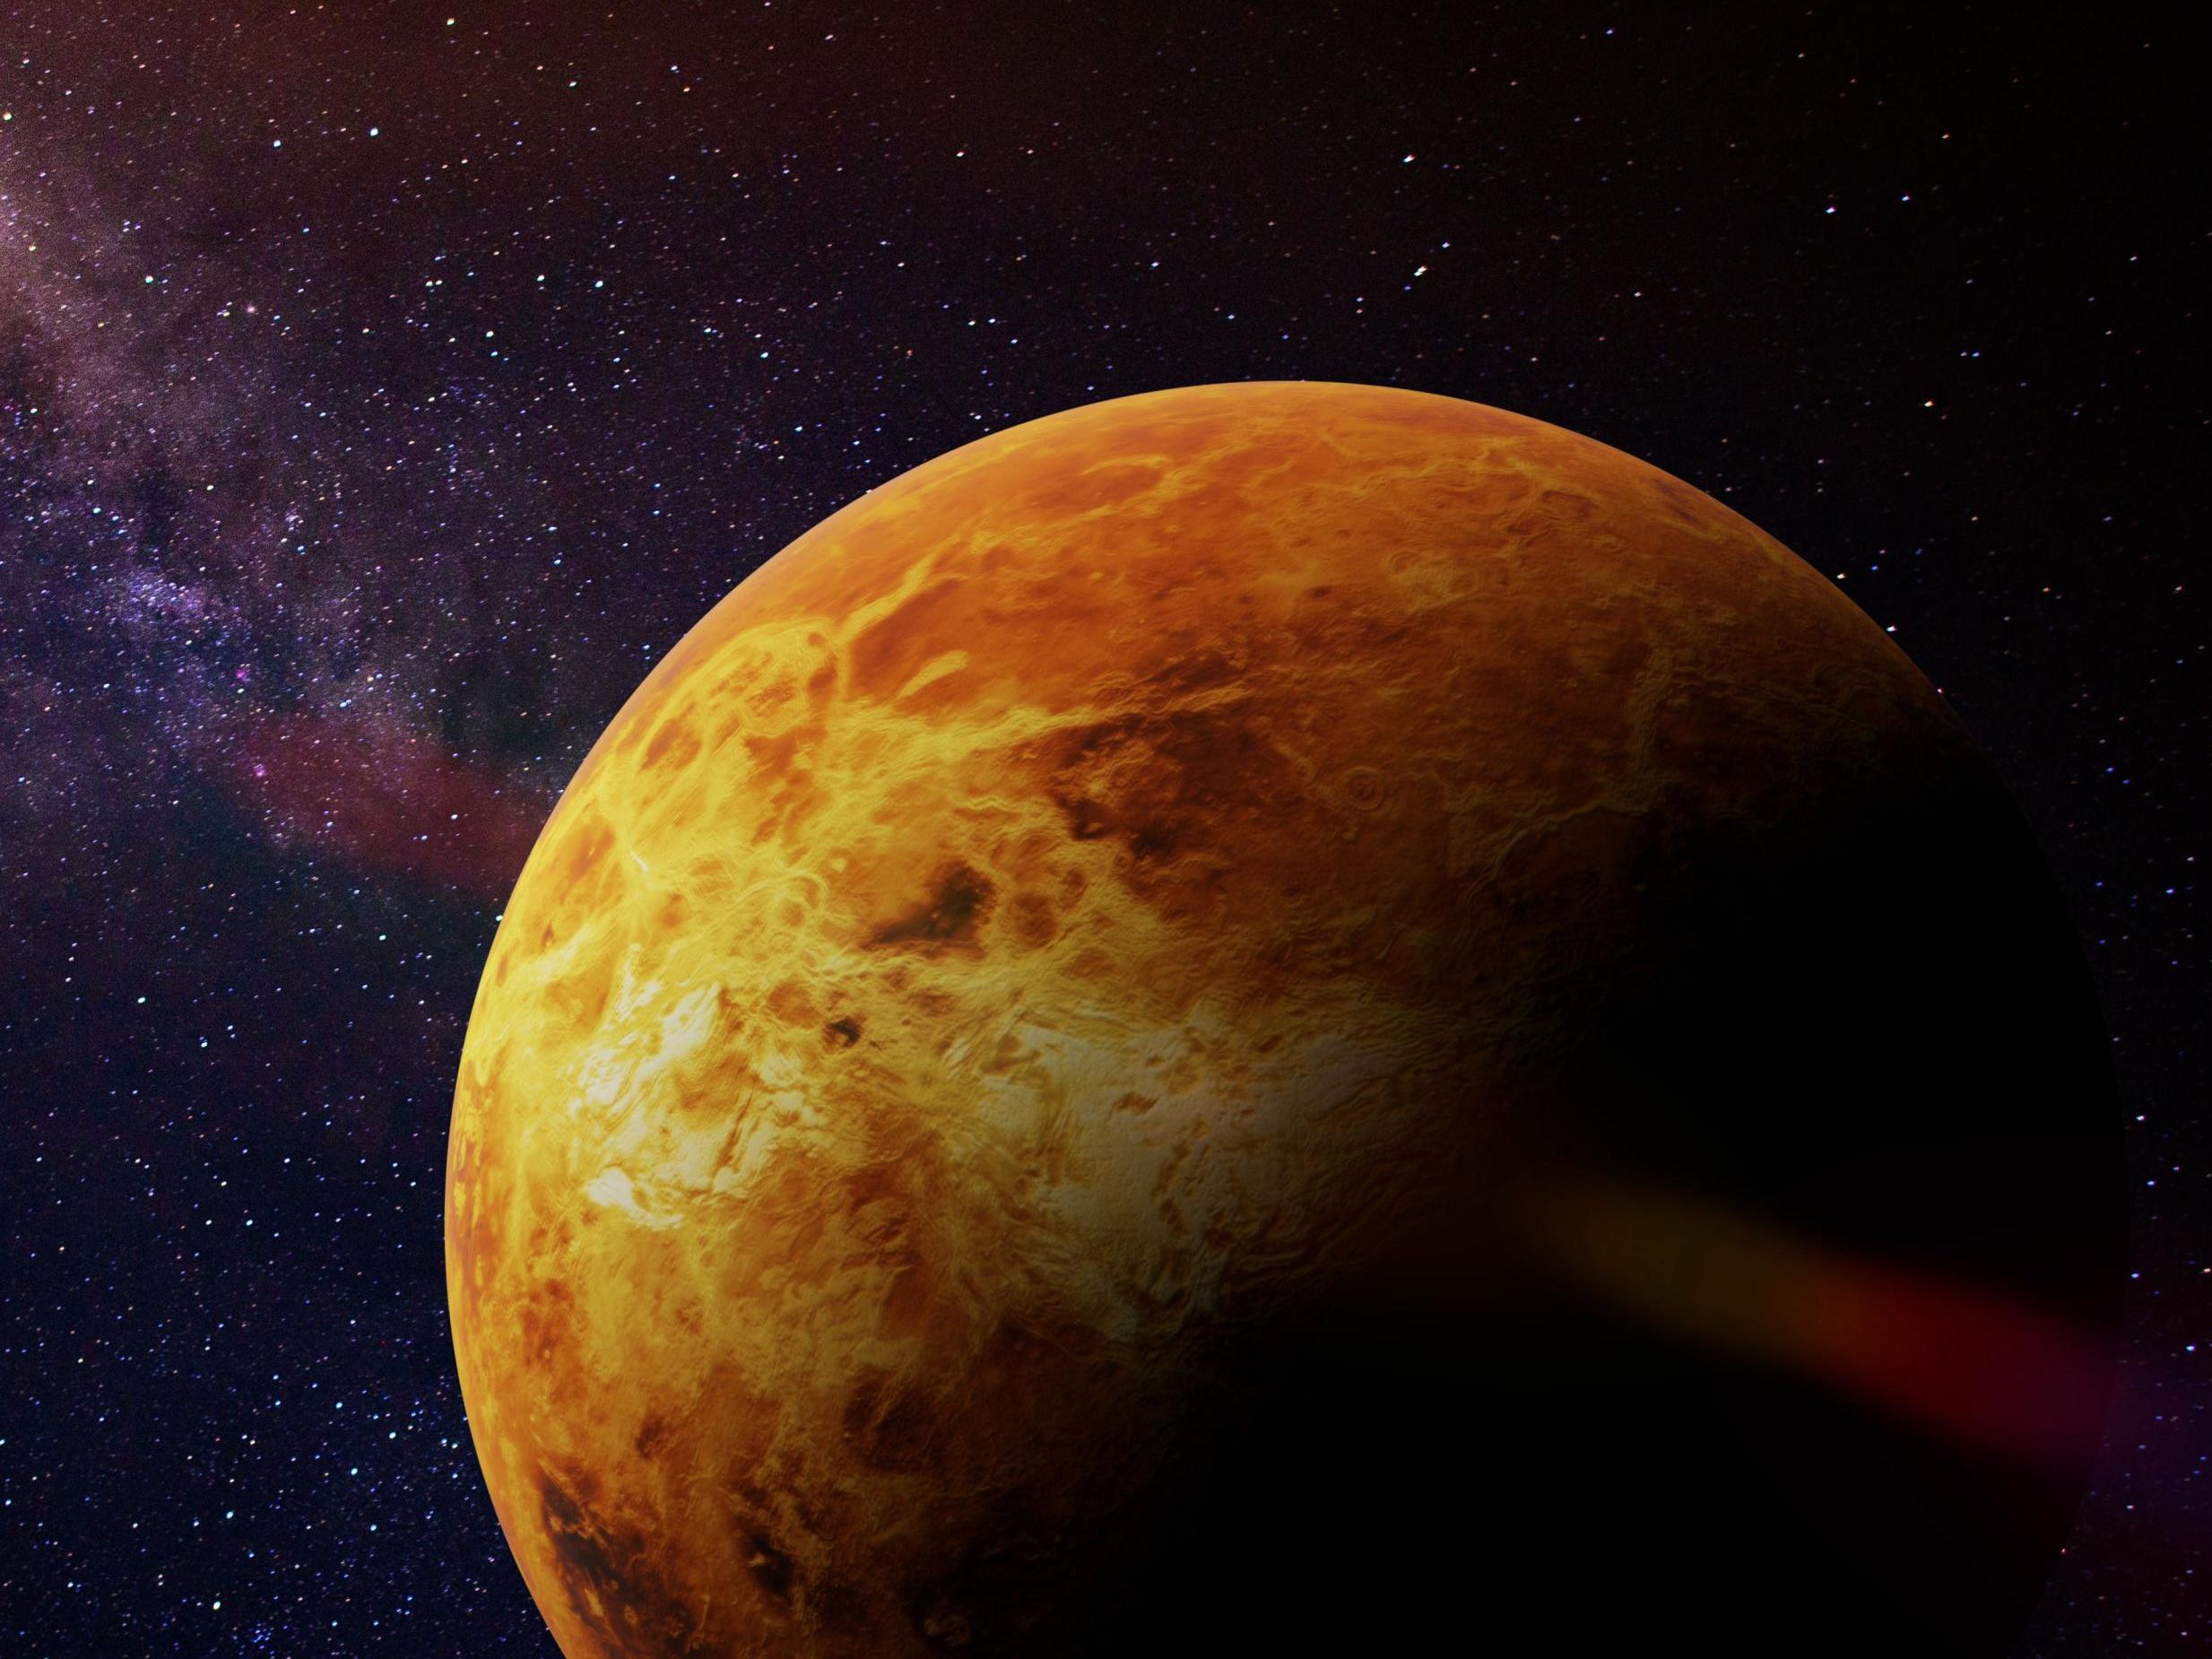 Astronauts should visit Venus on their way to Mars, scientists suggest